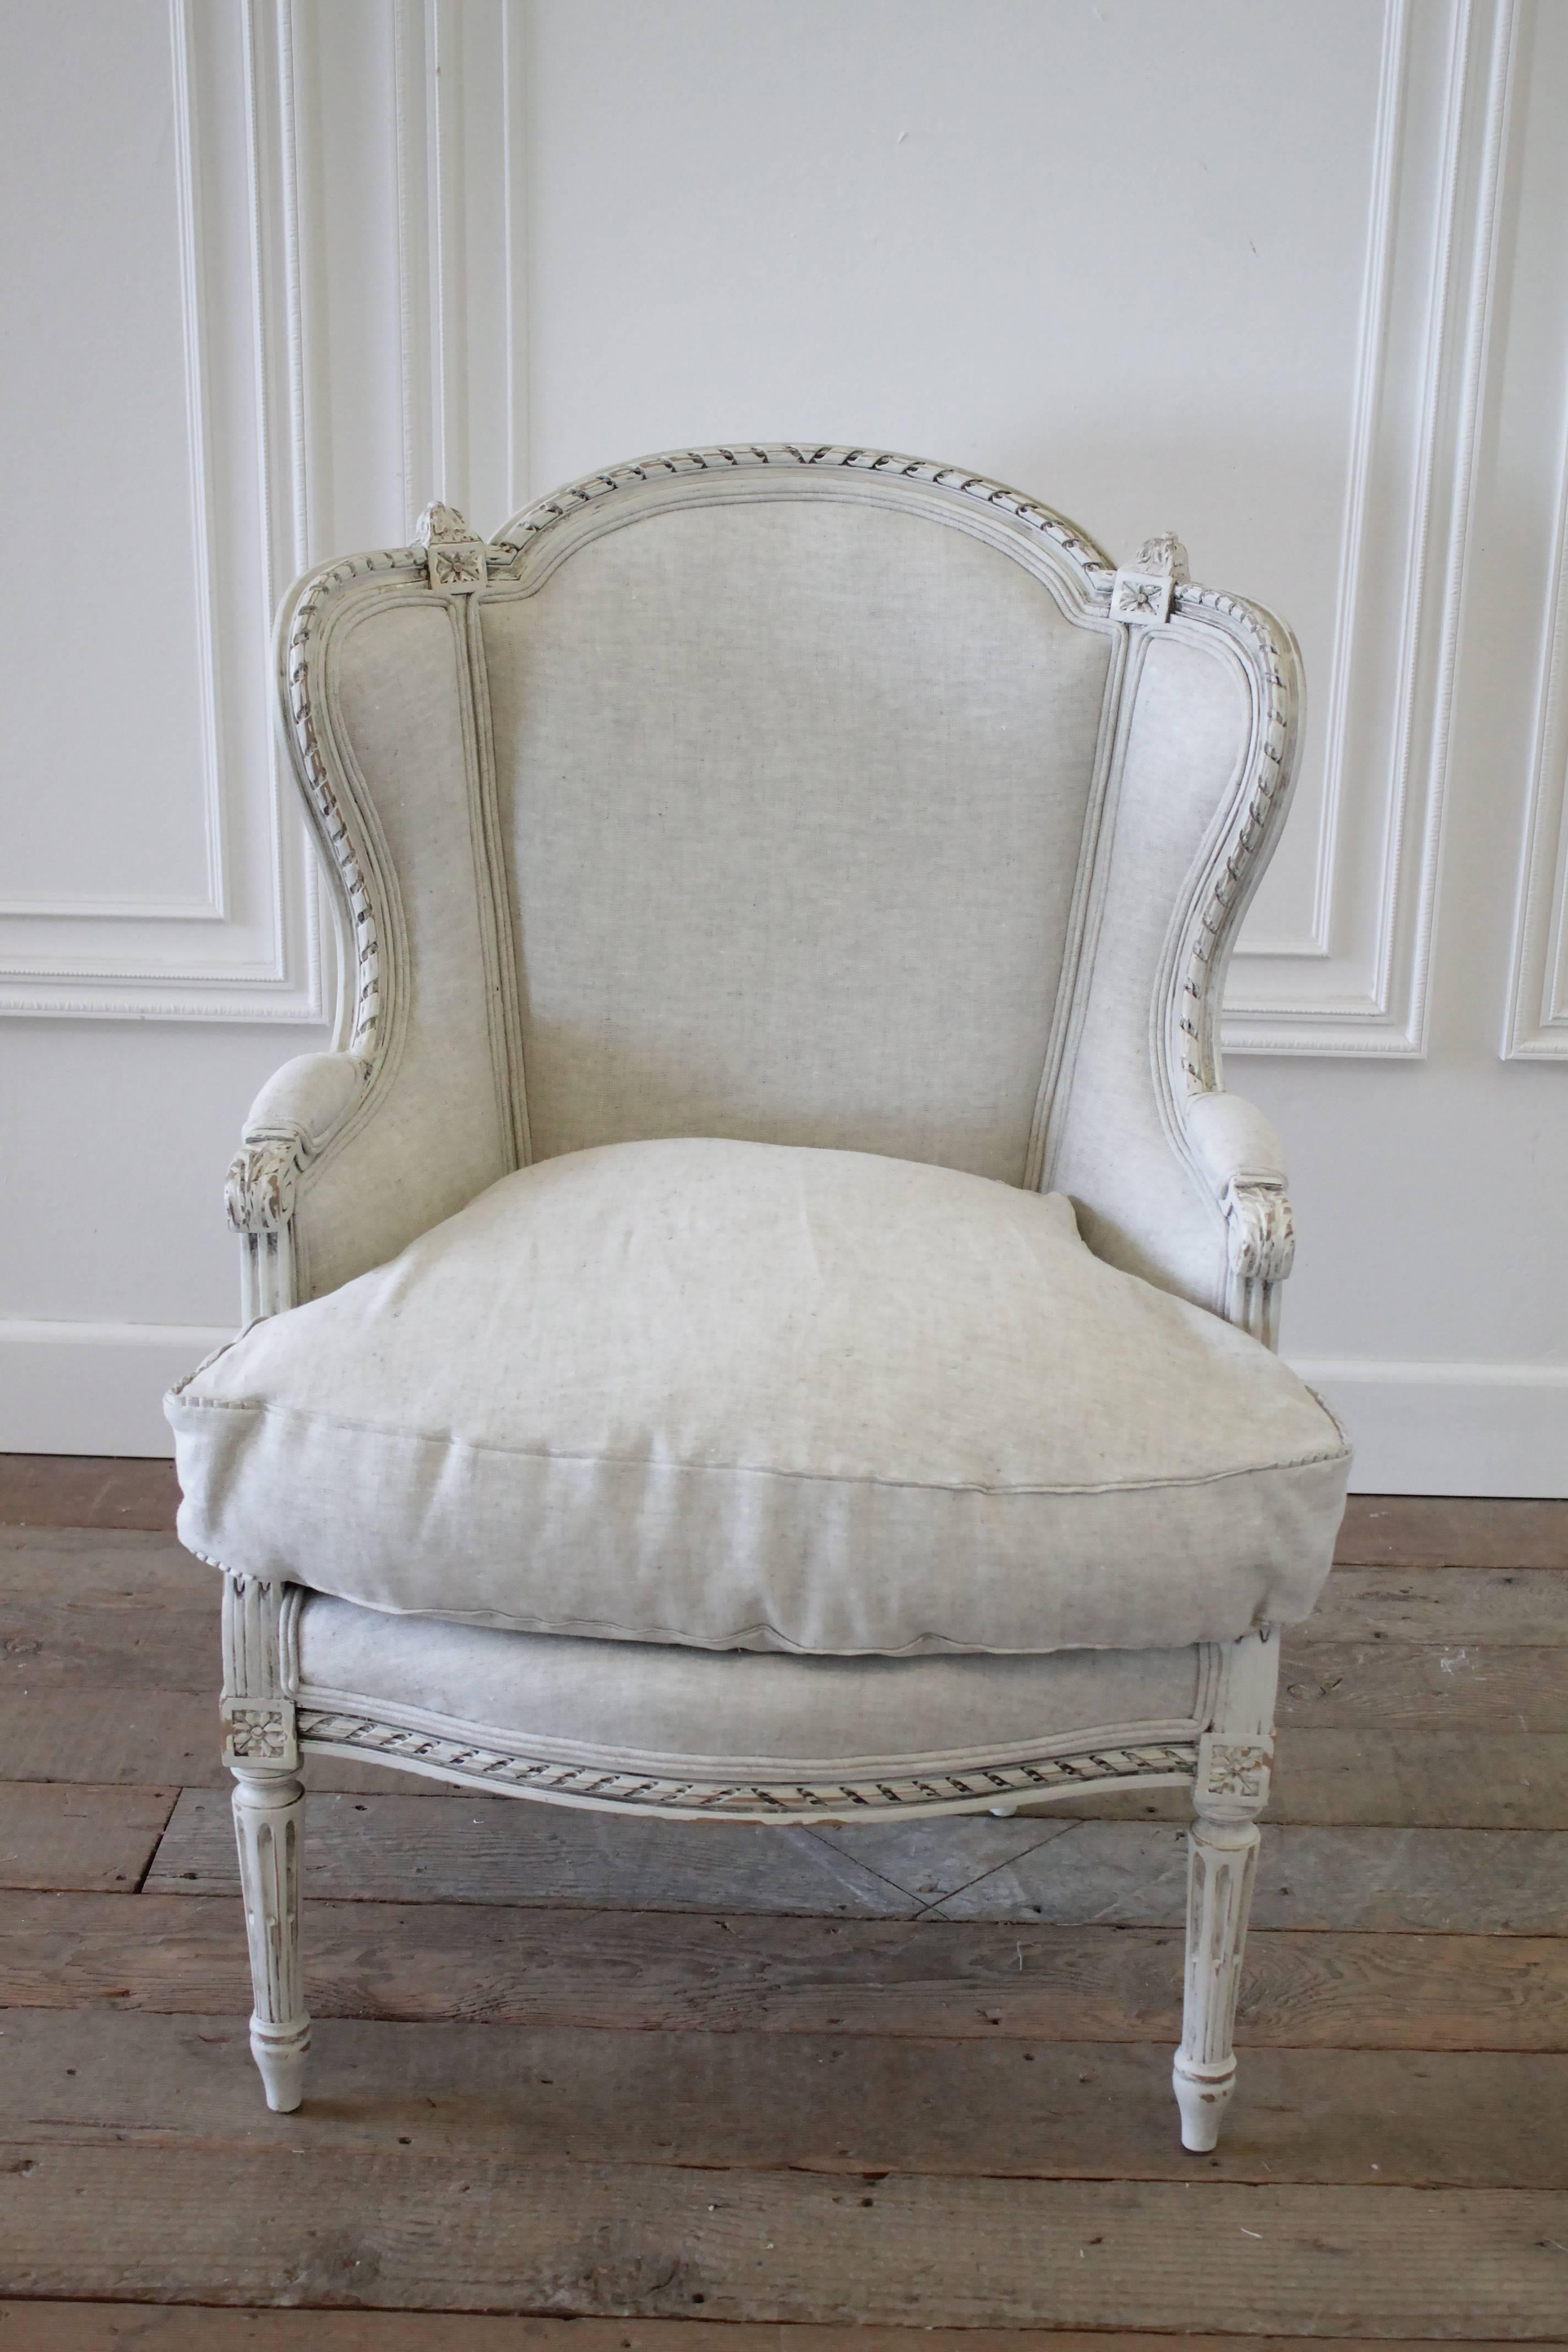 Beautiful French Louis XVI style wing chair has been painted in our oyster white, with subtle distressing, and an antique hand glazed finish. The paint colors are of an off white, with tones of grey and brown. The upholstery is done in a heavy